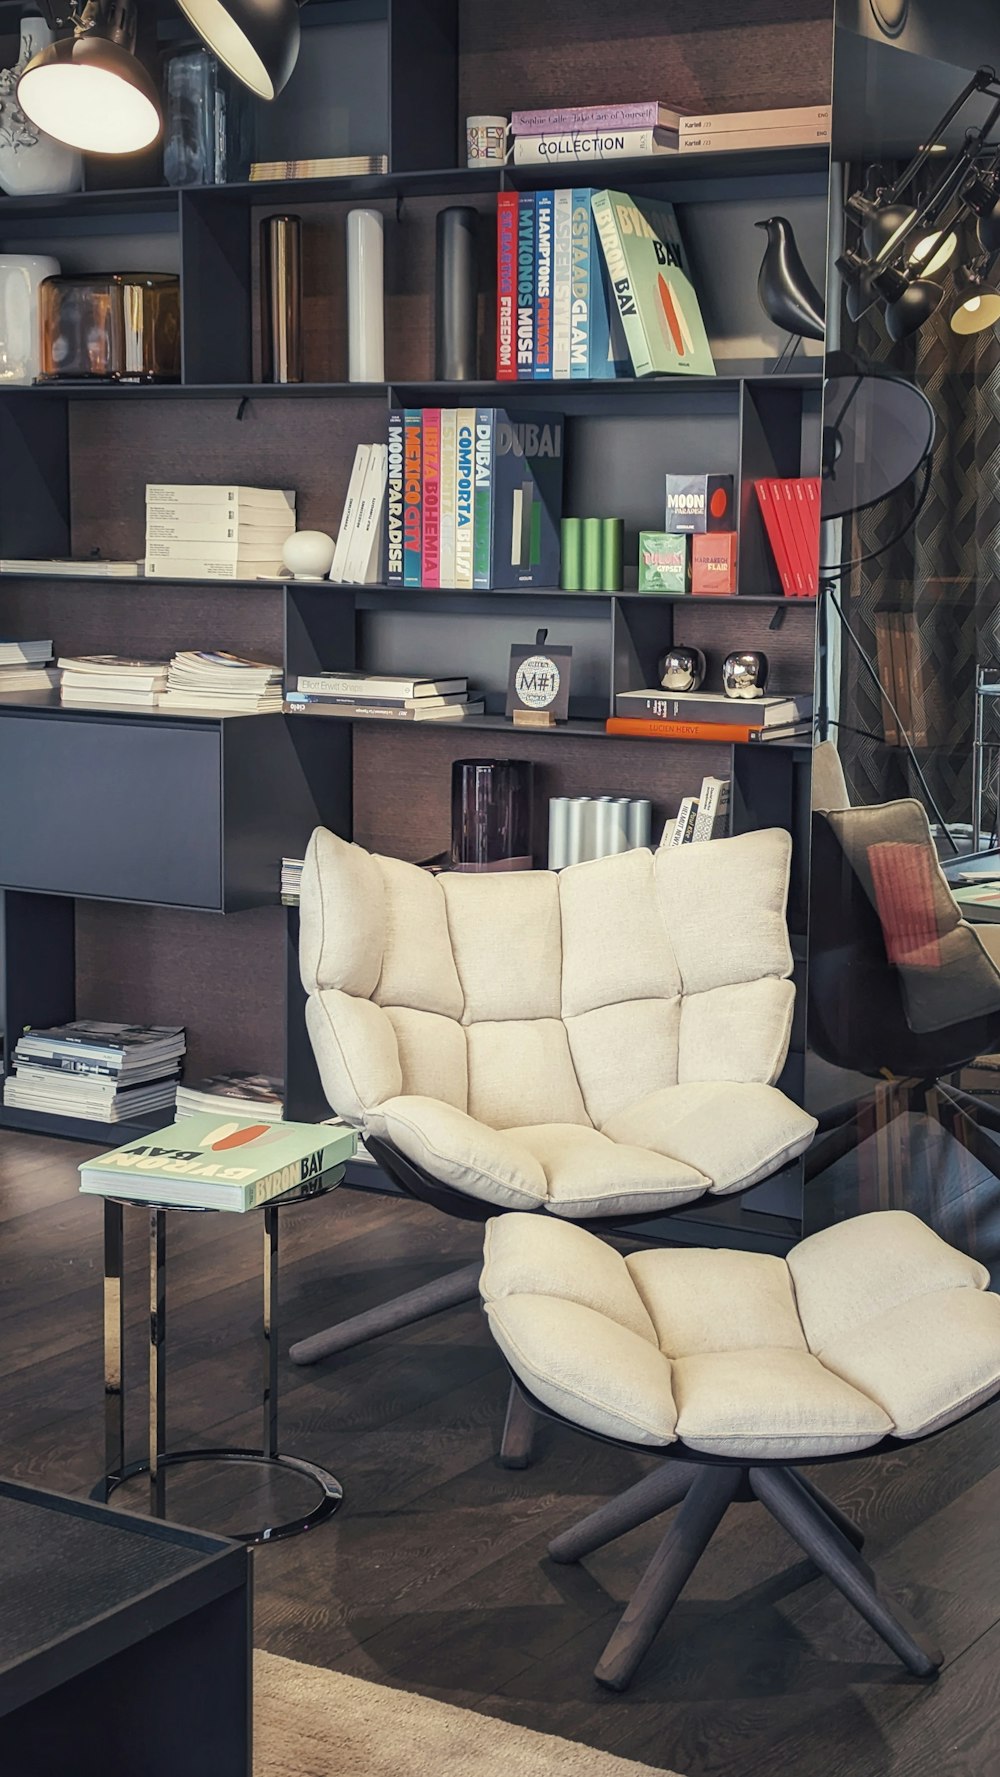 a chair and ottoman in a room with bookshelves